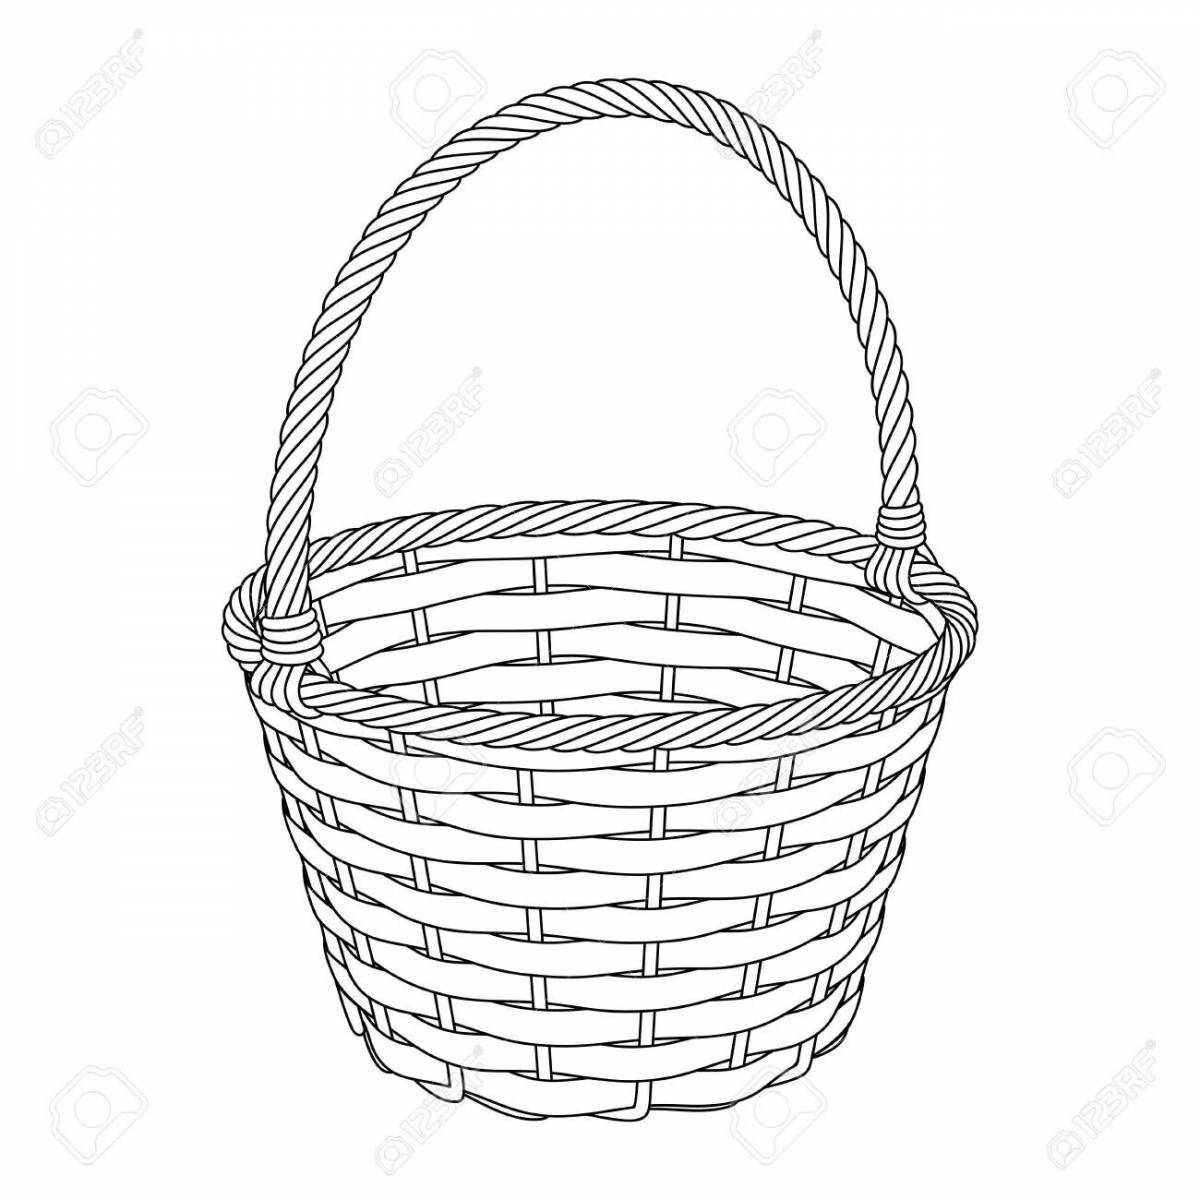 Great empty basket coloring book for kids